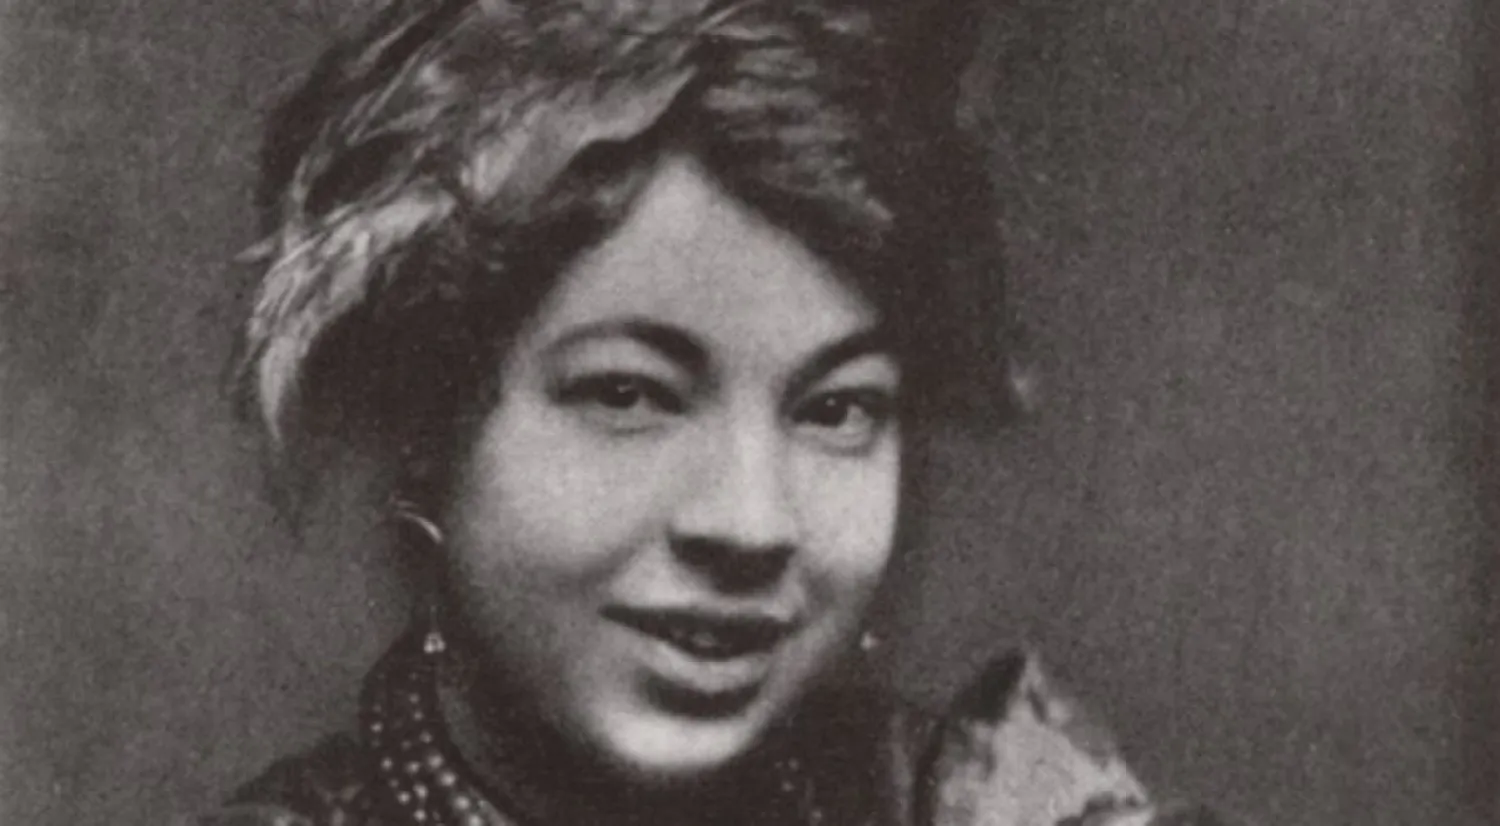 Photograph of Pamela Colman Smith, wearing a scarf in her hair and a mischievous smile.